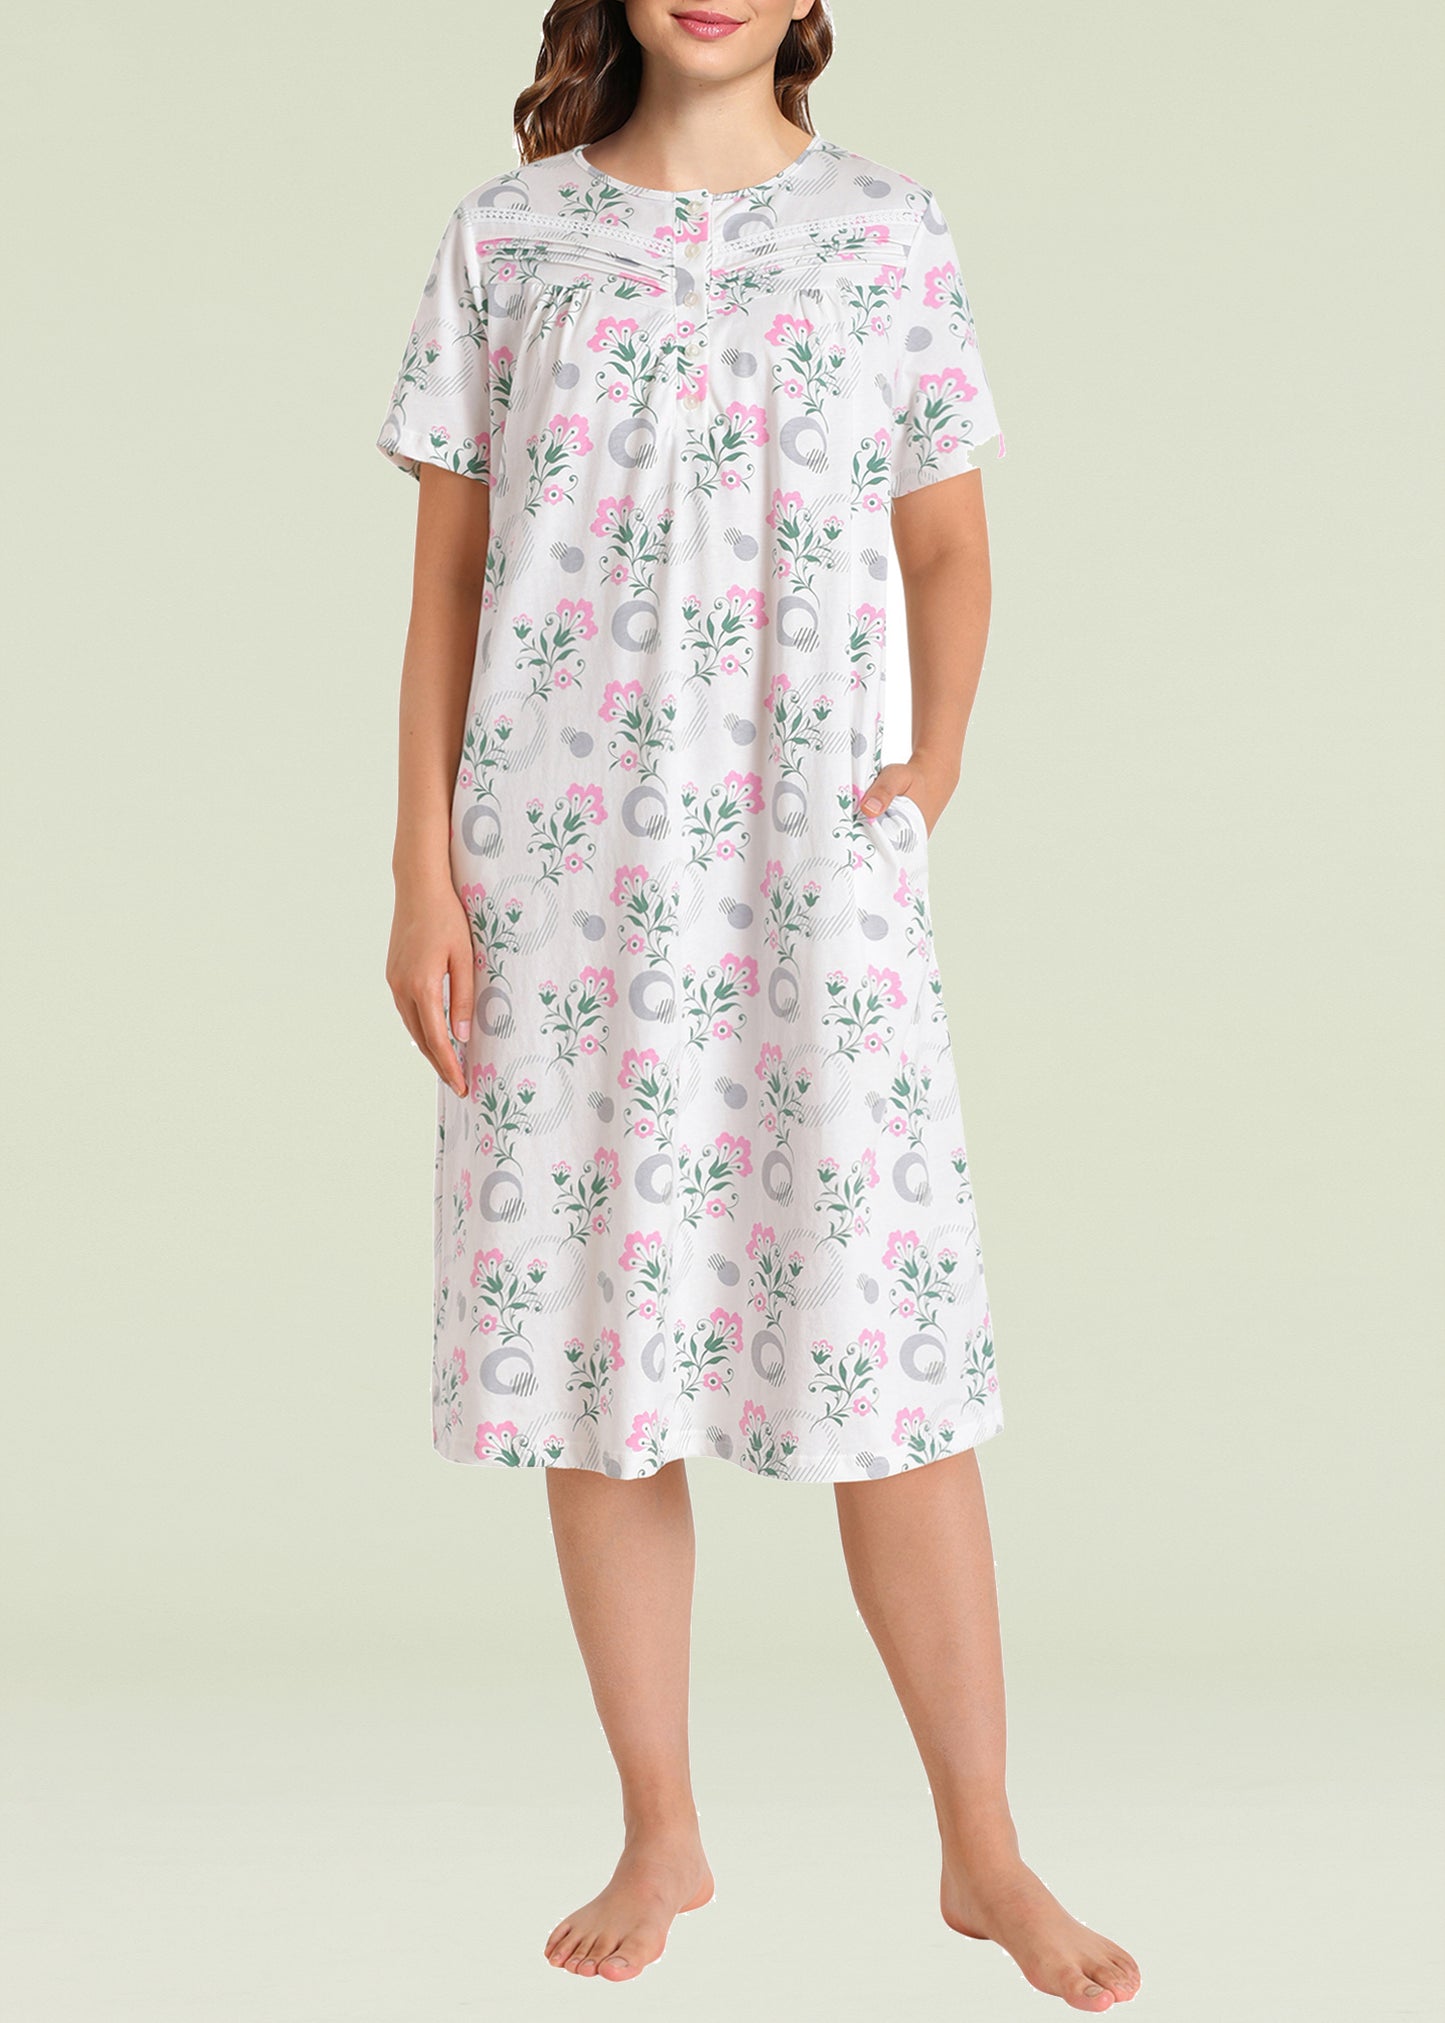 Women's Old Fashioned Soft Cotton Floral Nightgown